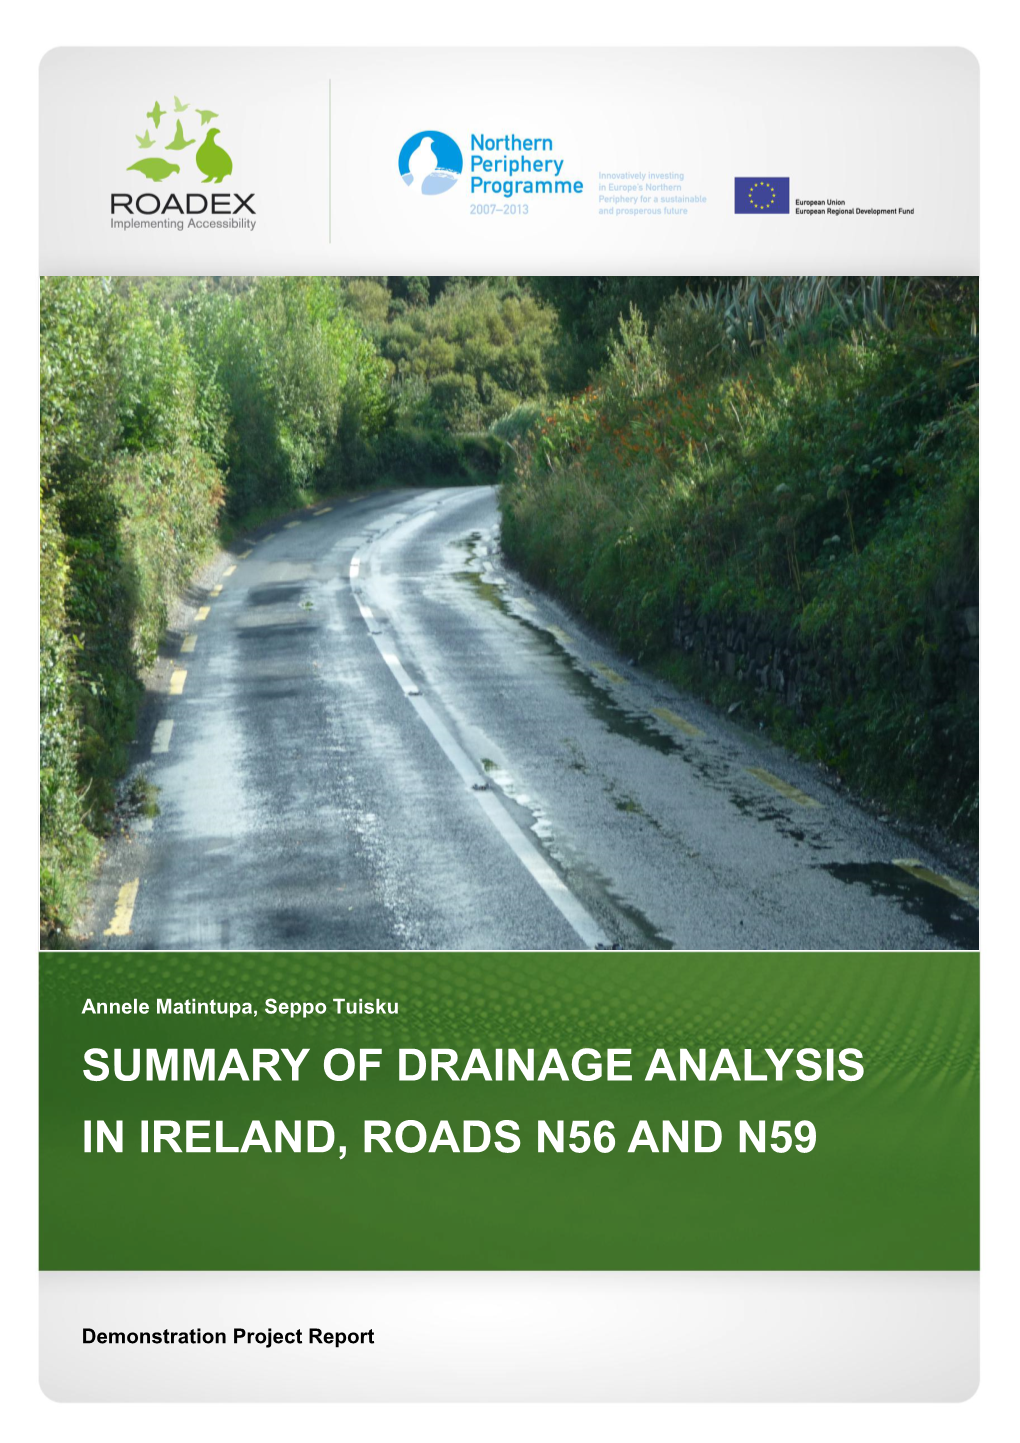 Summary of Drainage Analysis in Ireland, Roads N56 and N59